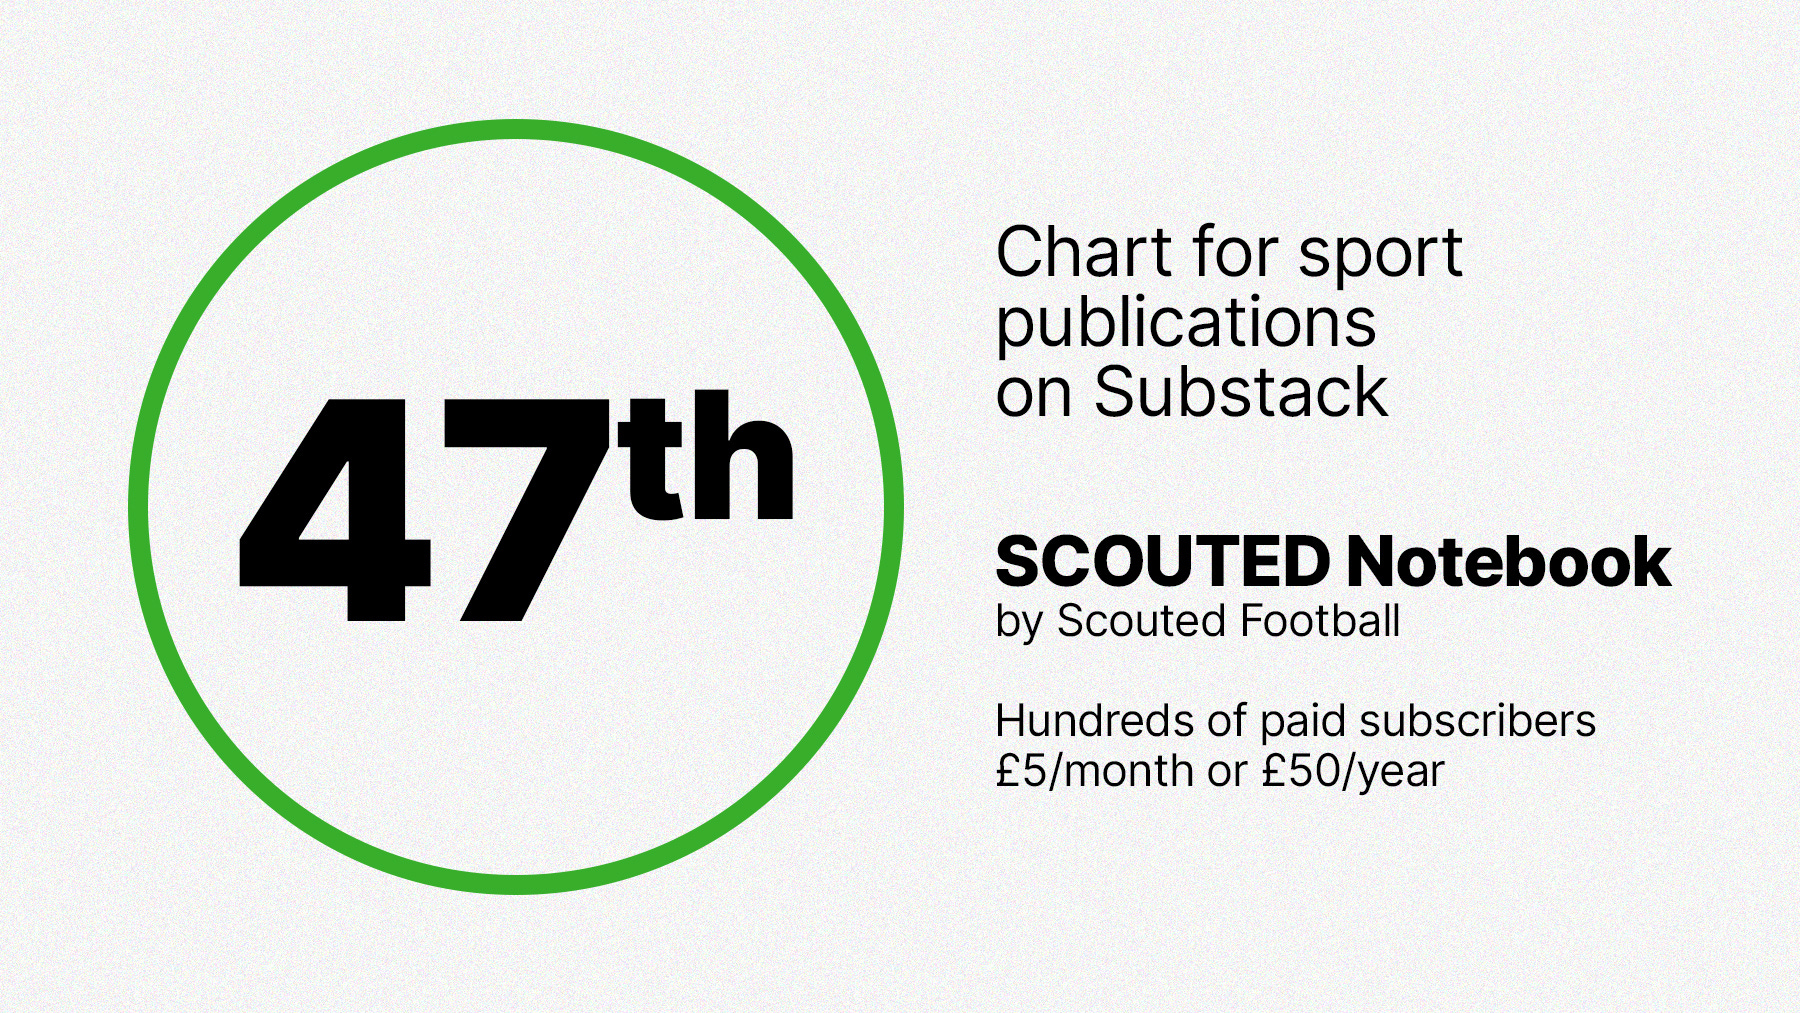 A graphic featuring SCOUTED Notebook's 47th-place ranking on Substack's sport publications, up from 67th last month